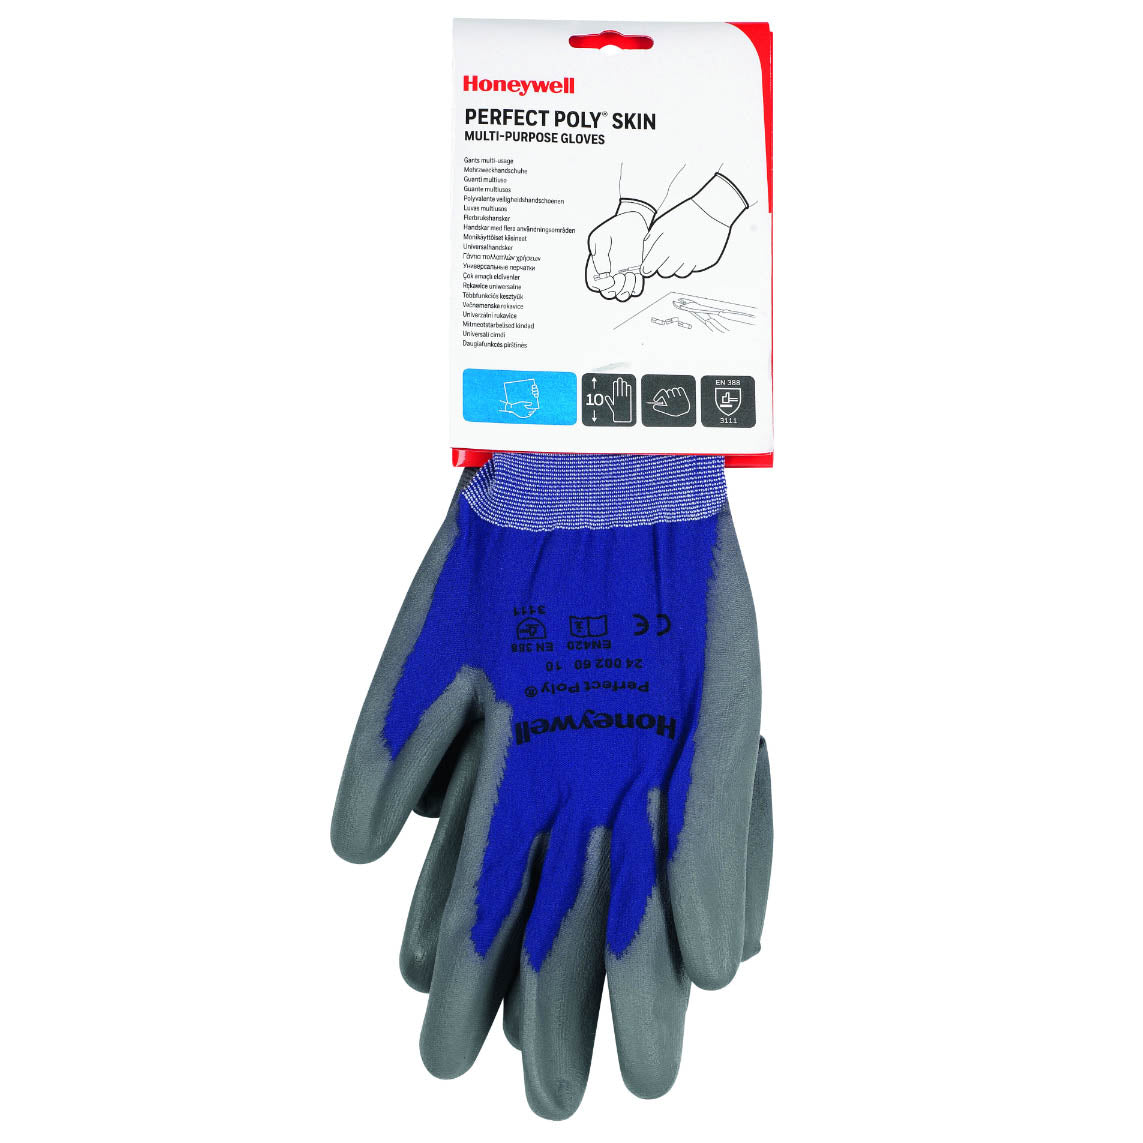 Honeywell 2400260 Pecfect Poly Skin Gloves single pack